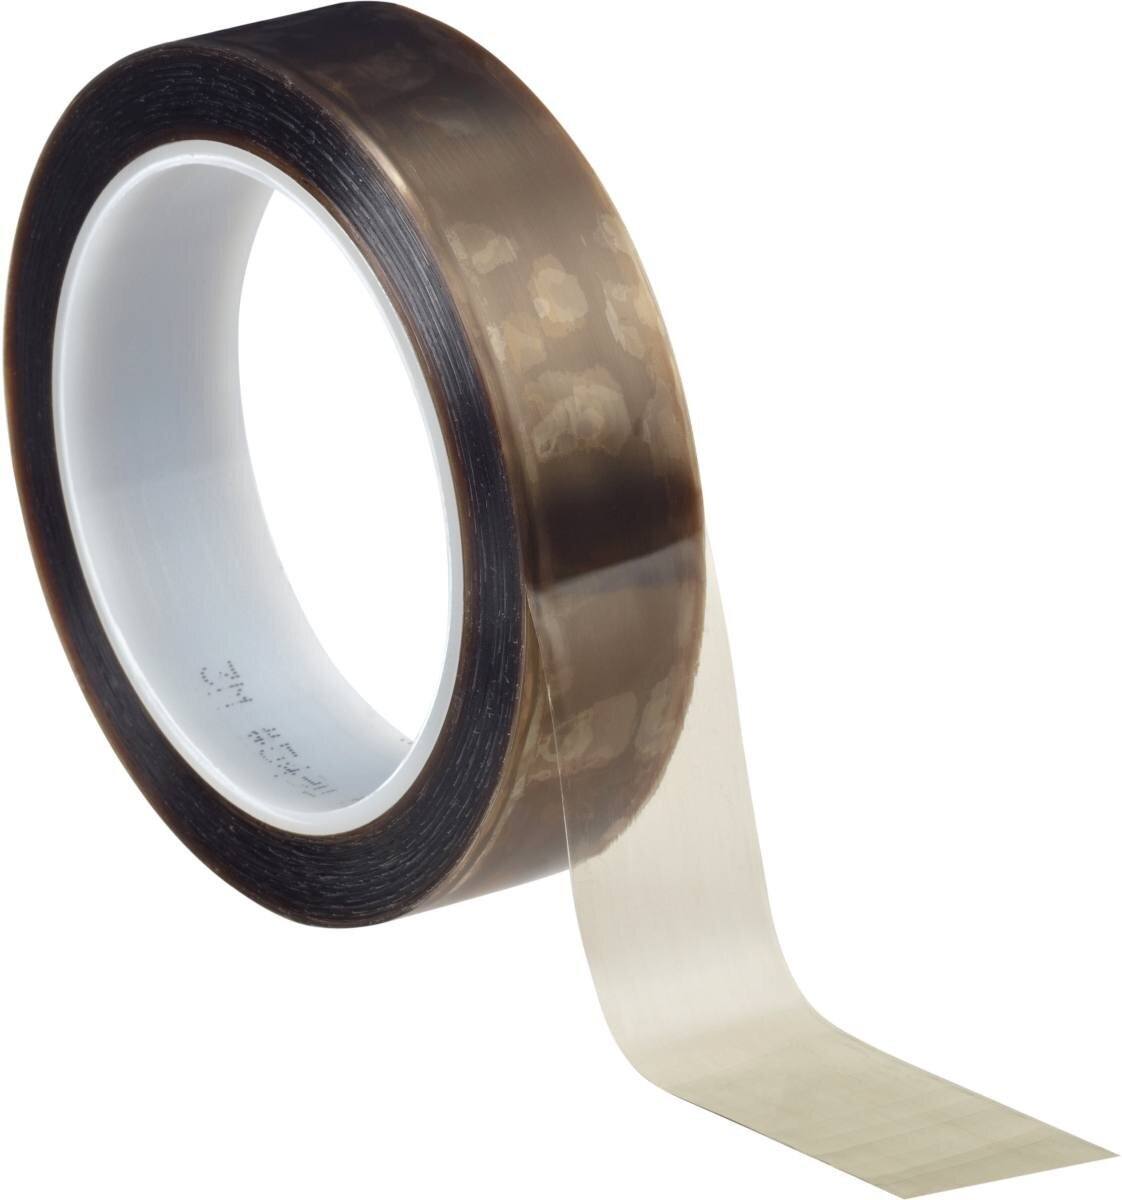 3M 5490 PTFE extruded film adhesive tape 15.8mmx33m, 0.09mm, silicone